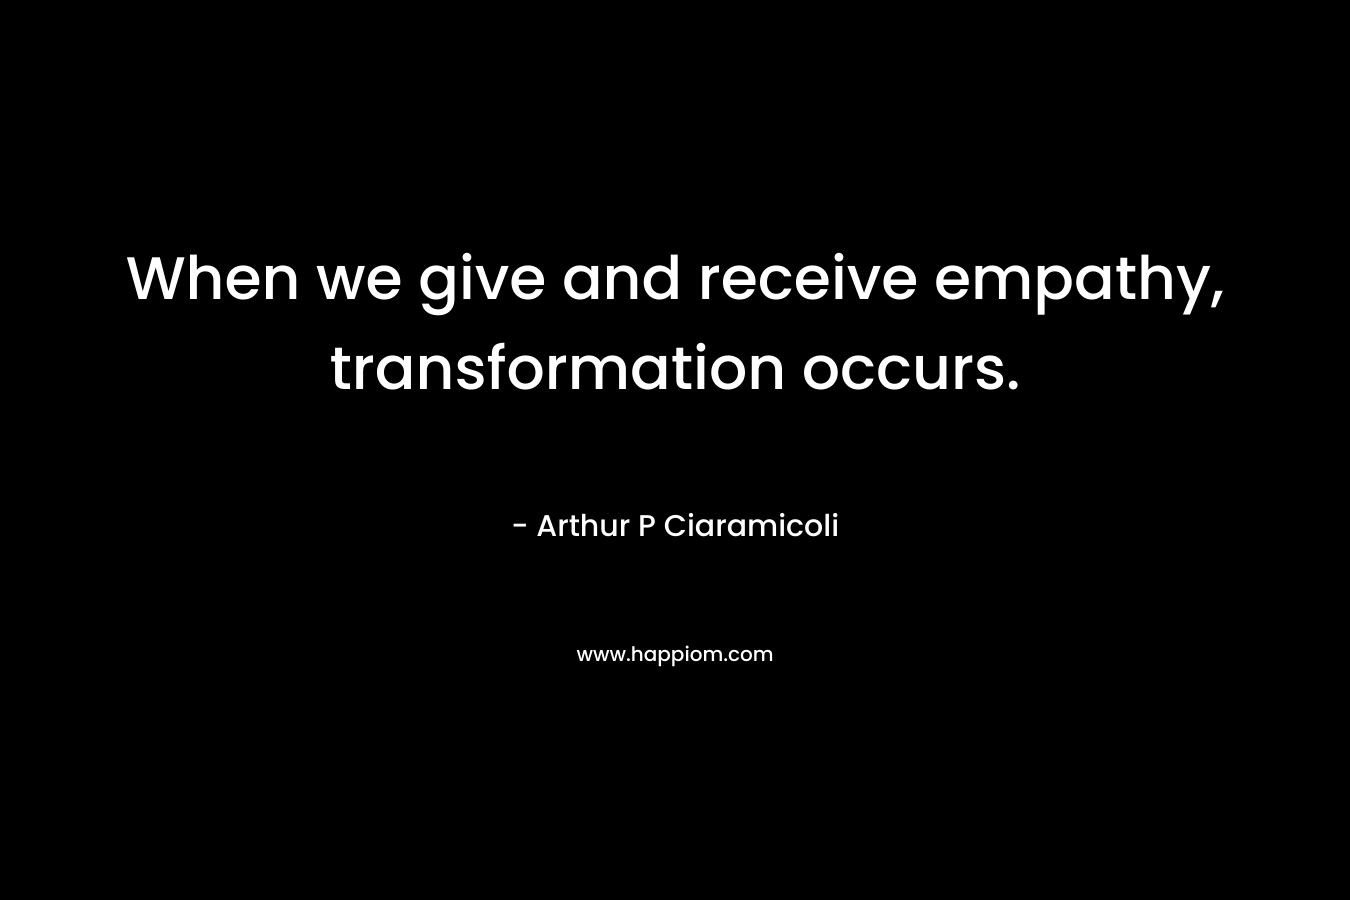 When we give and receive empathy, transformation occurs.